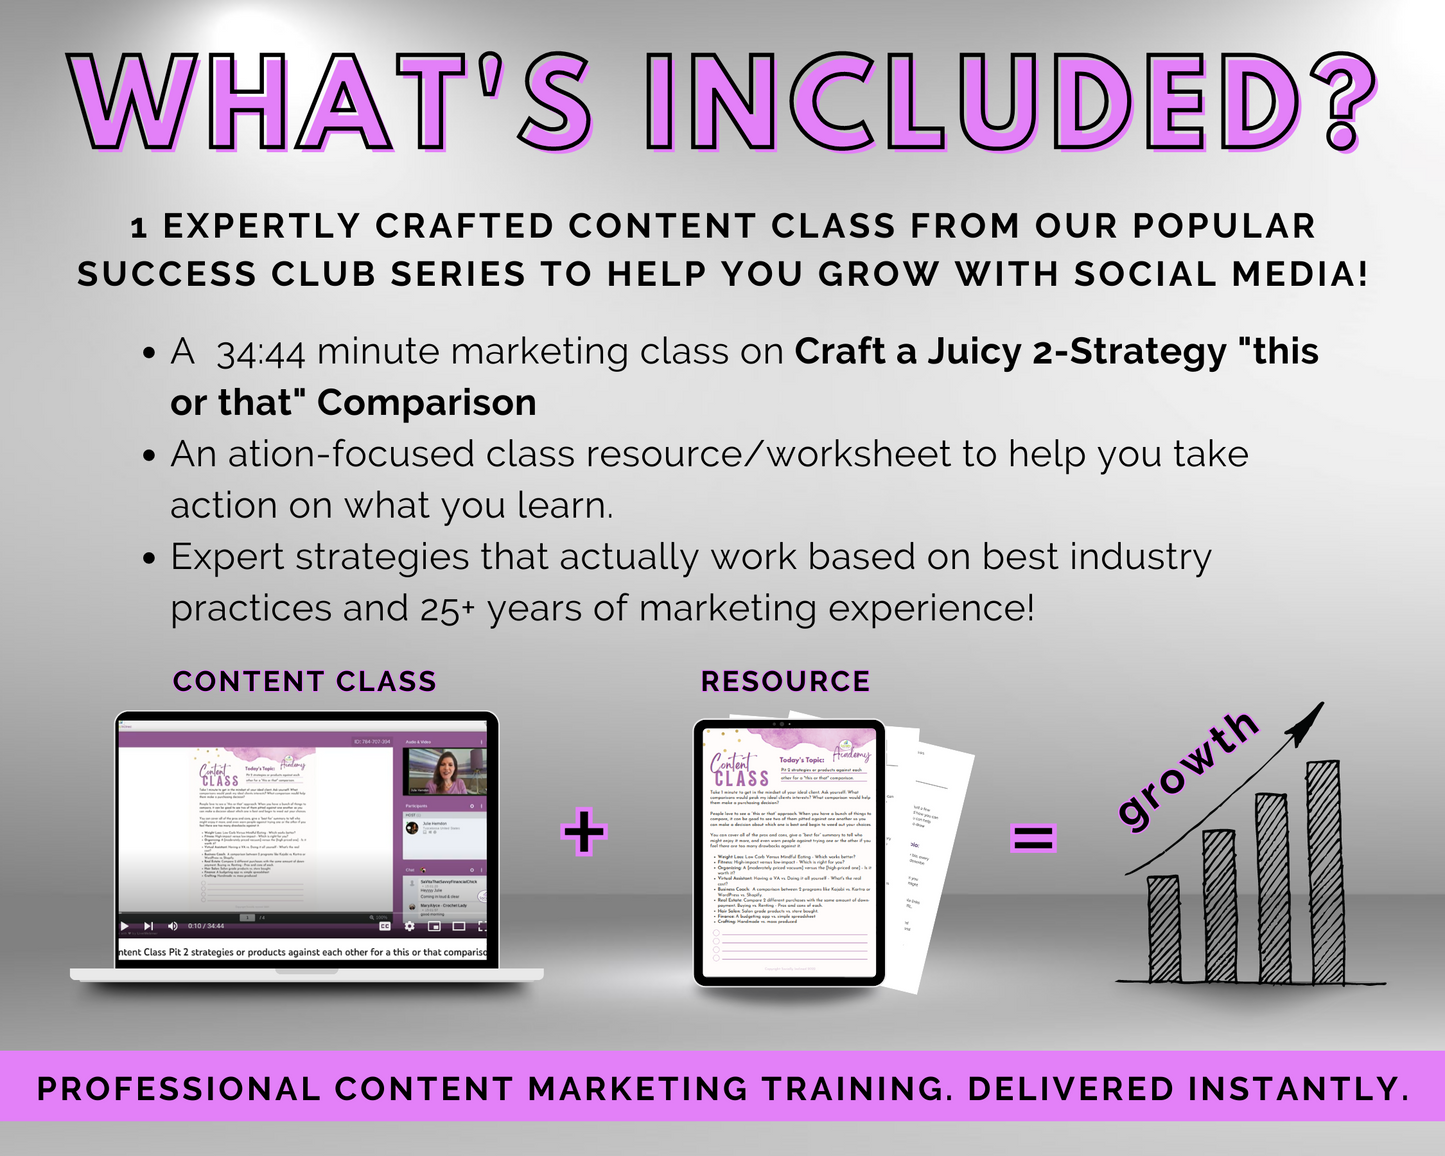 Content Class - Craft a Juicy 2-Strategy "this or that" Comparison Masterclass